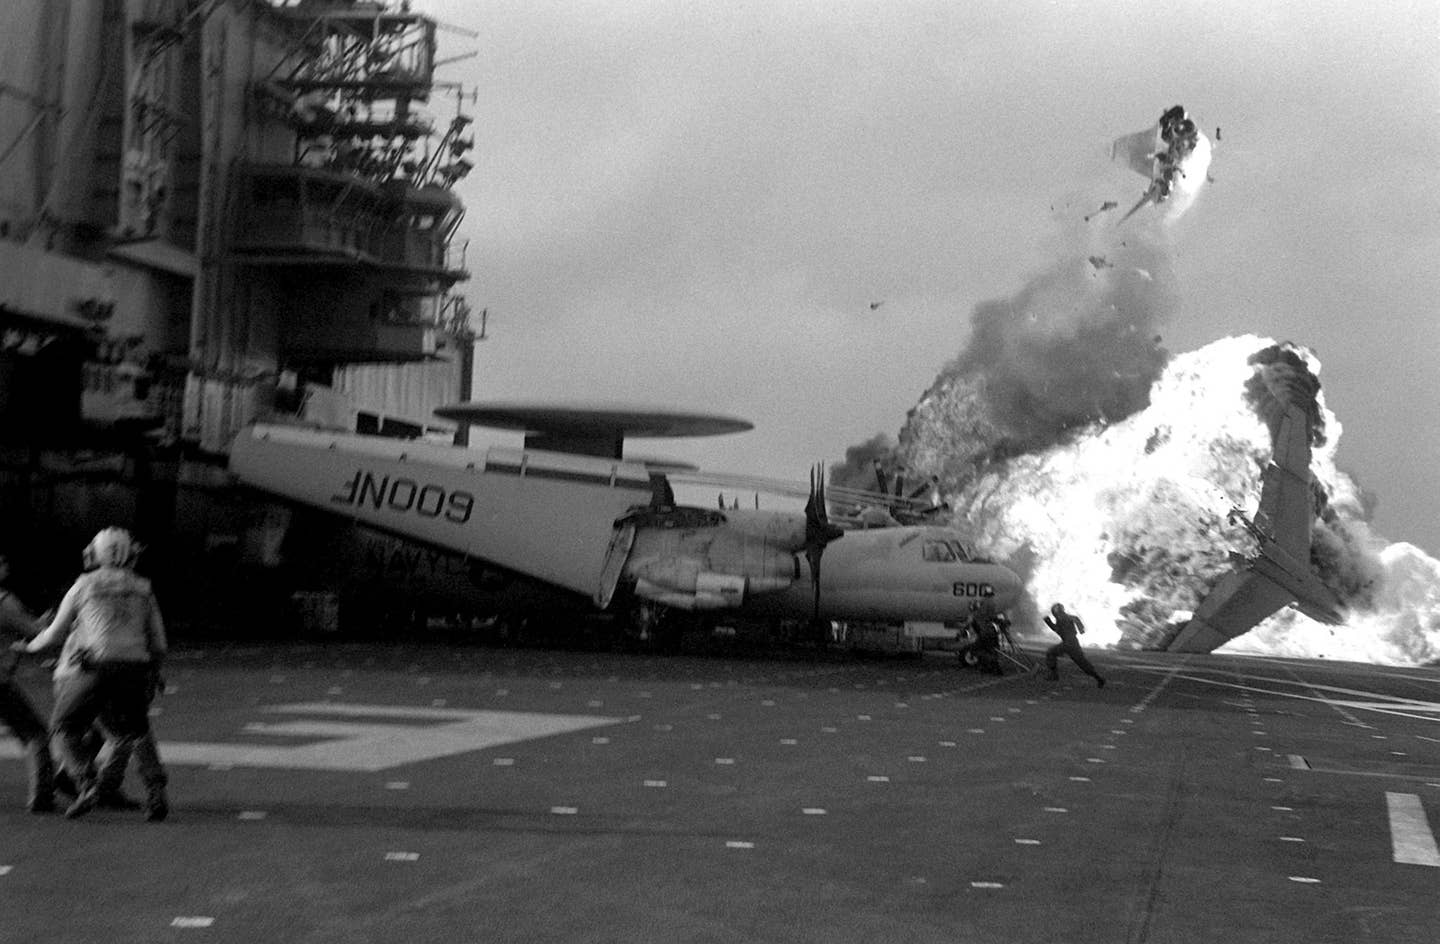 An Attack Squadron 56 (VA-56) A-7E Corsair aircraft bursts into flames after a ramp strike on the aircraft carrier USS MIDWAY (CV-41). (U.S. Navy photo)